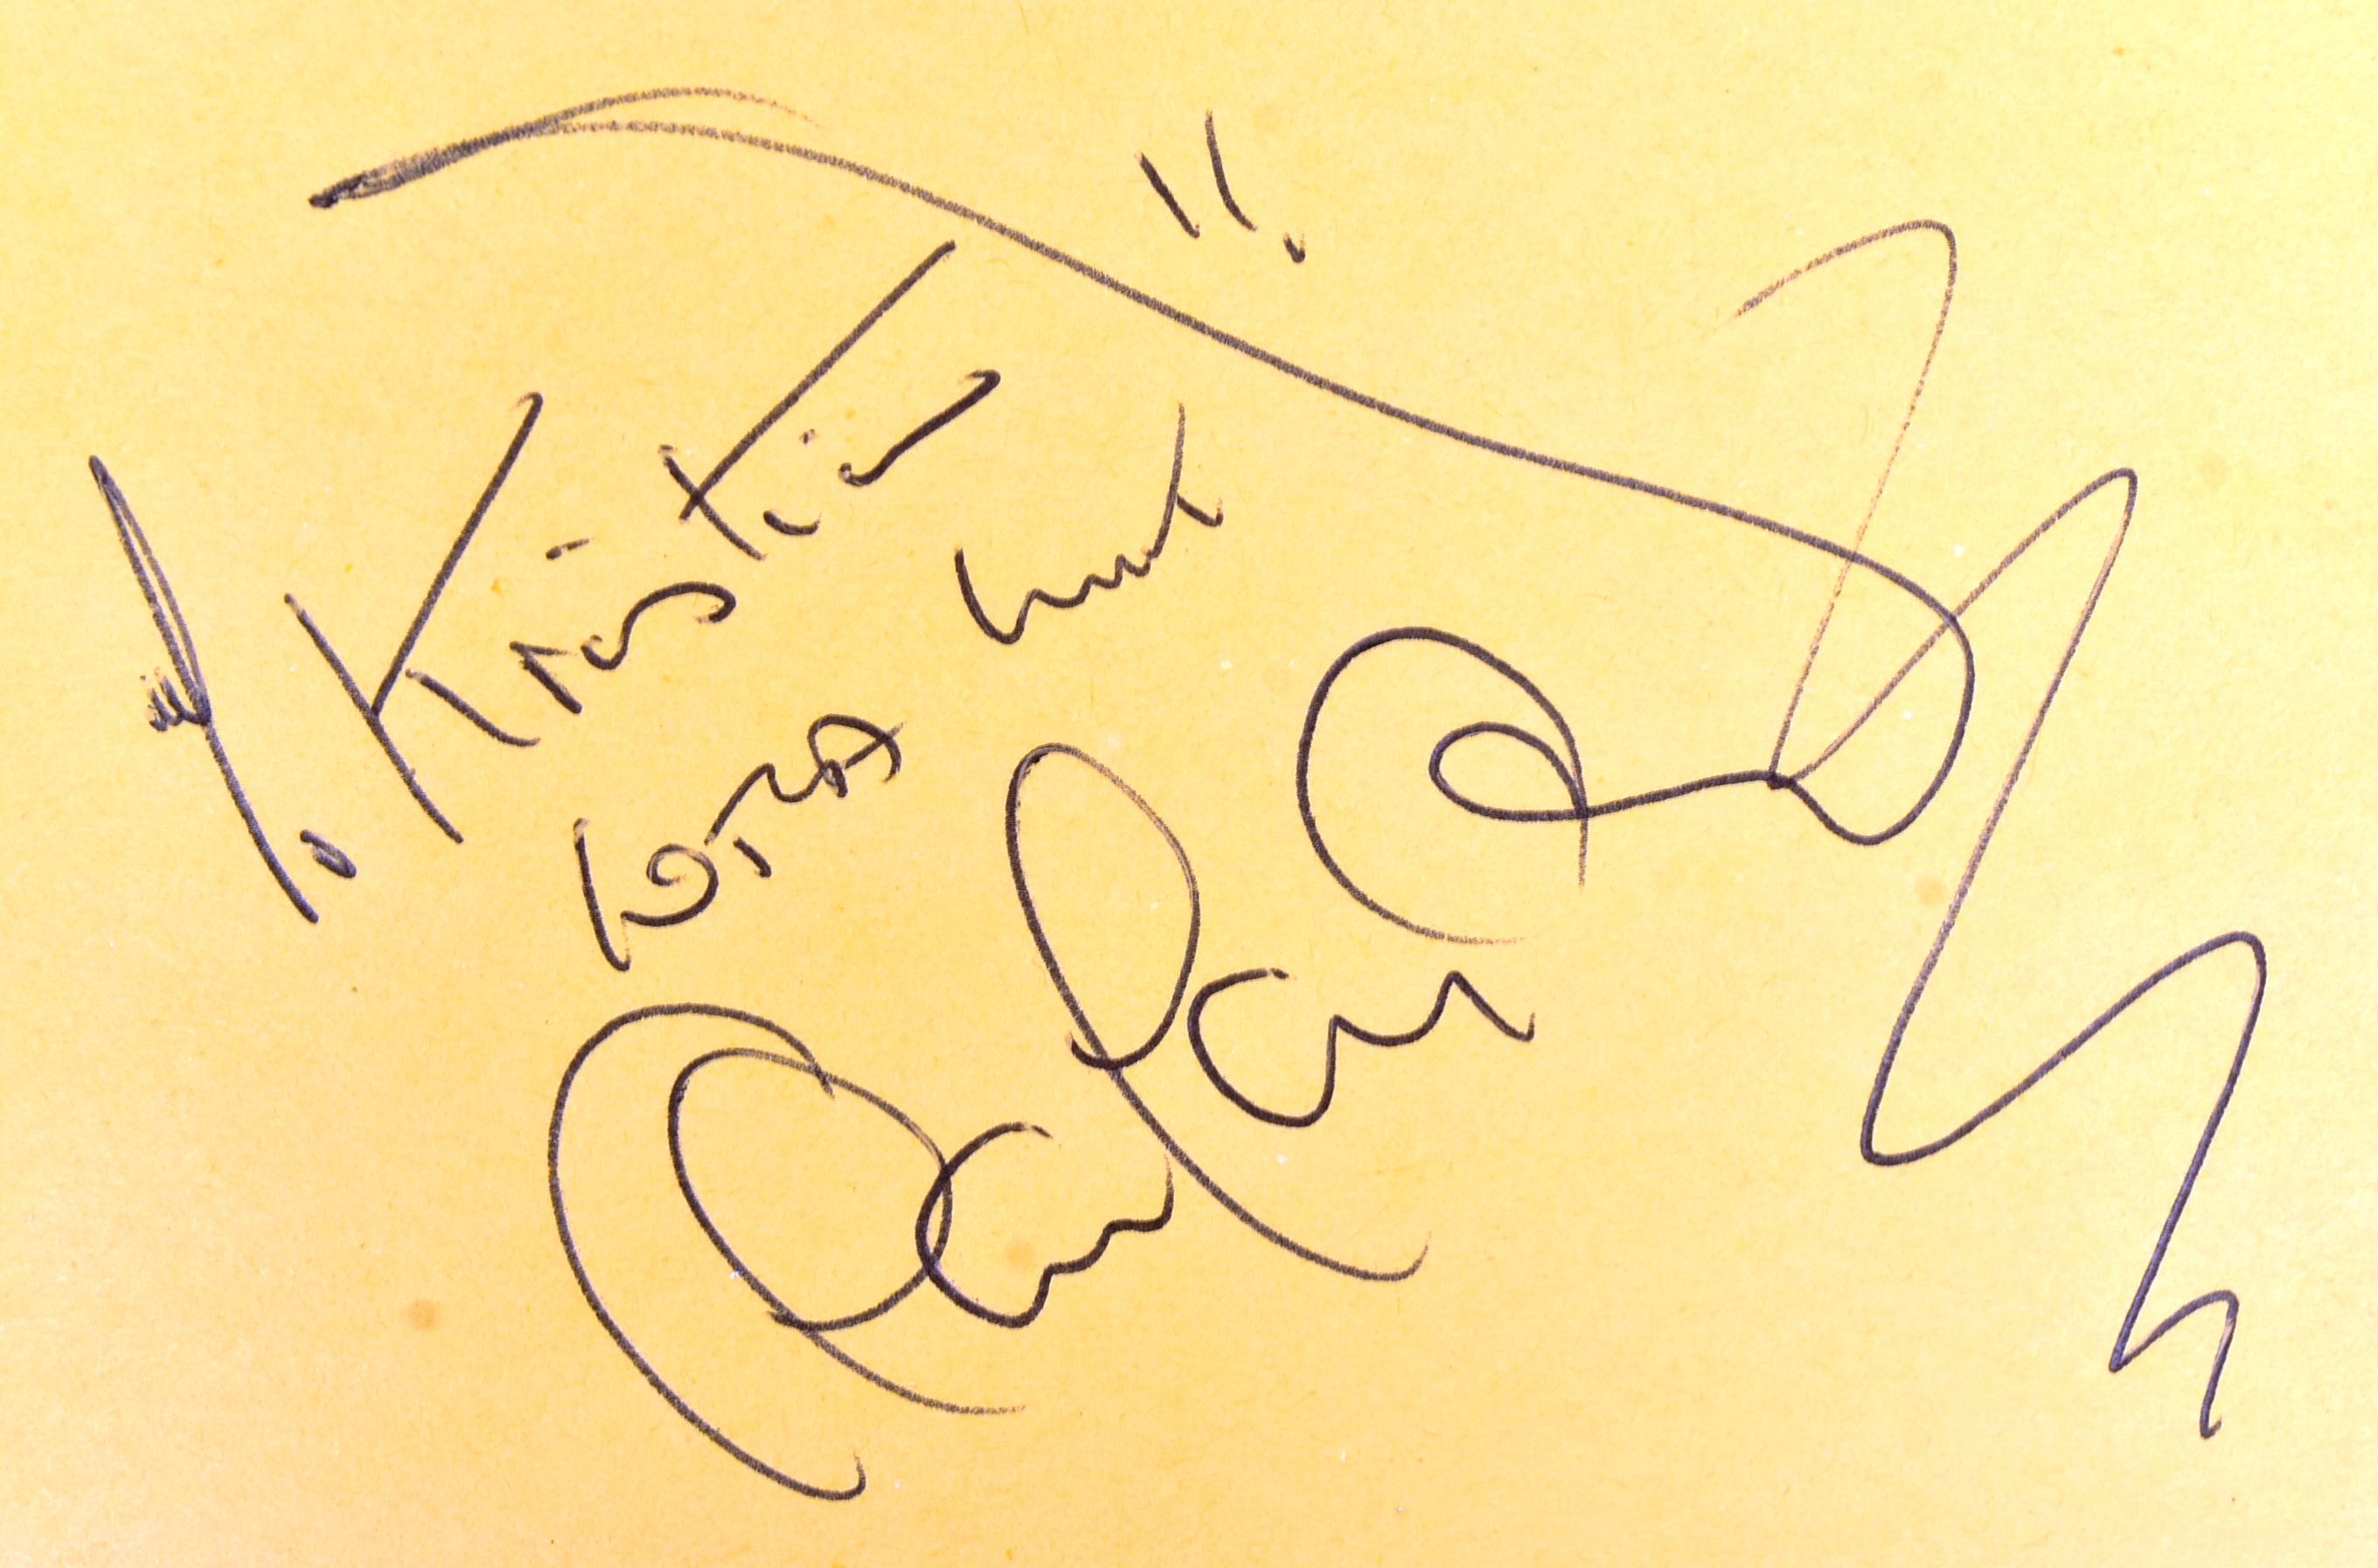 AUTOGRAPH ALBUM - INCLUDING JON PERTWEE (DOCTOR WHO) - Image 2 of 5